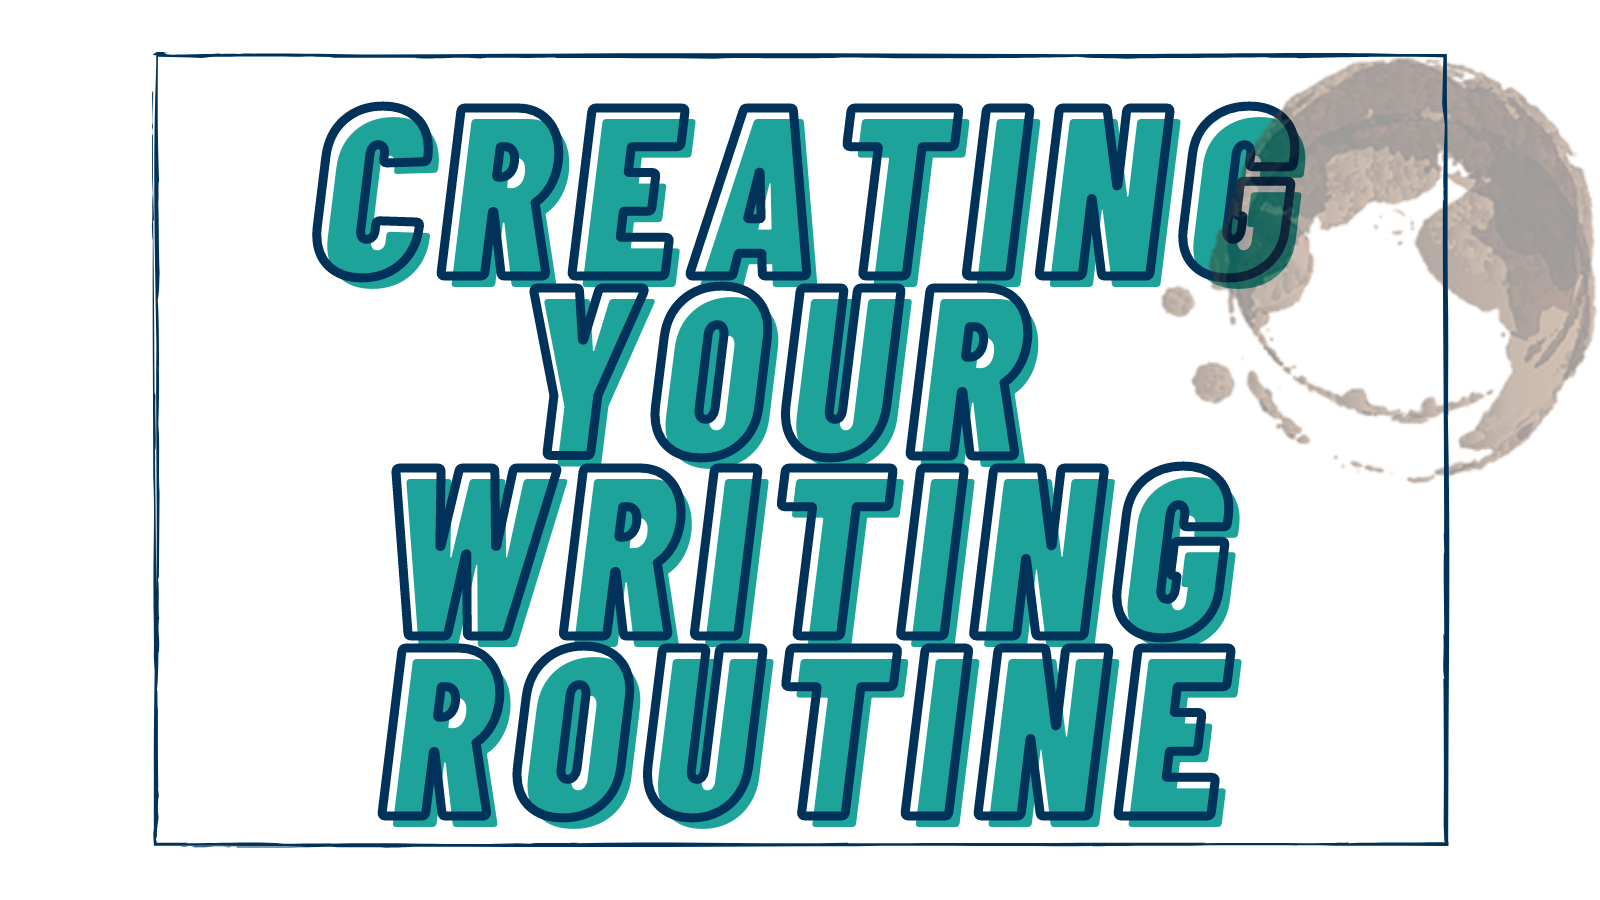 "Creating Your Writing Routine"